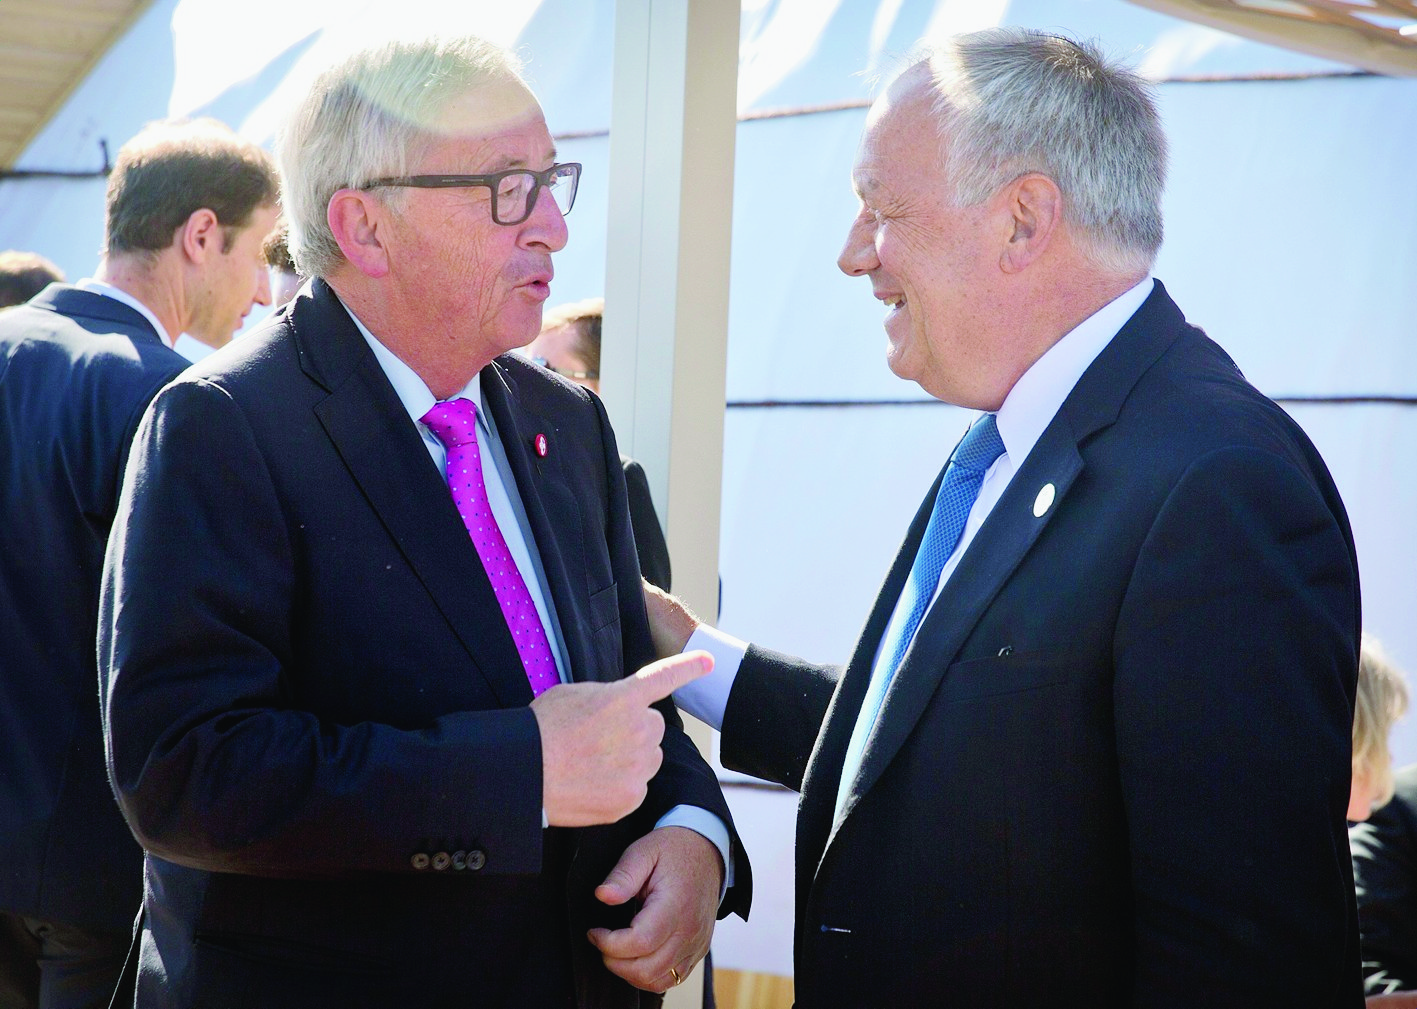 European Commission President Jean-Claude Juncker, left, is greeted by Switzerland's President Johann Schneider-Ammann, right, before a bilateral meeting at the 11th Asia-Europe Meeting (ASEM) in Ulaanbaatar, Mongolia, Saturday, July 16, 2016. (AP Photo/Mark Schiefelbein) MONGOLIA ASIA EUROPE SUMMIT